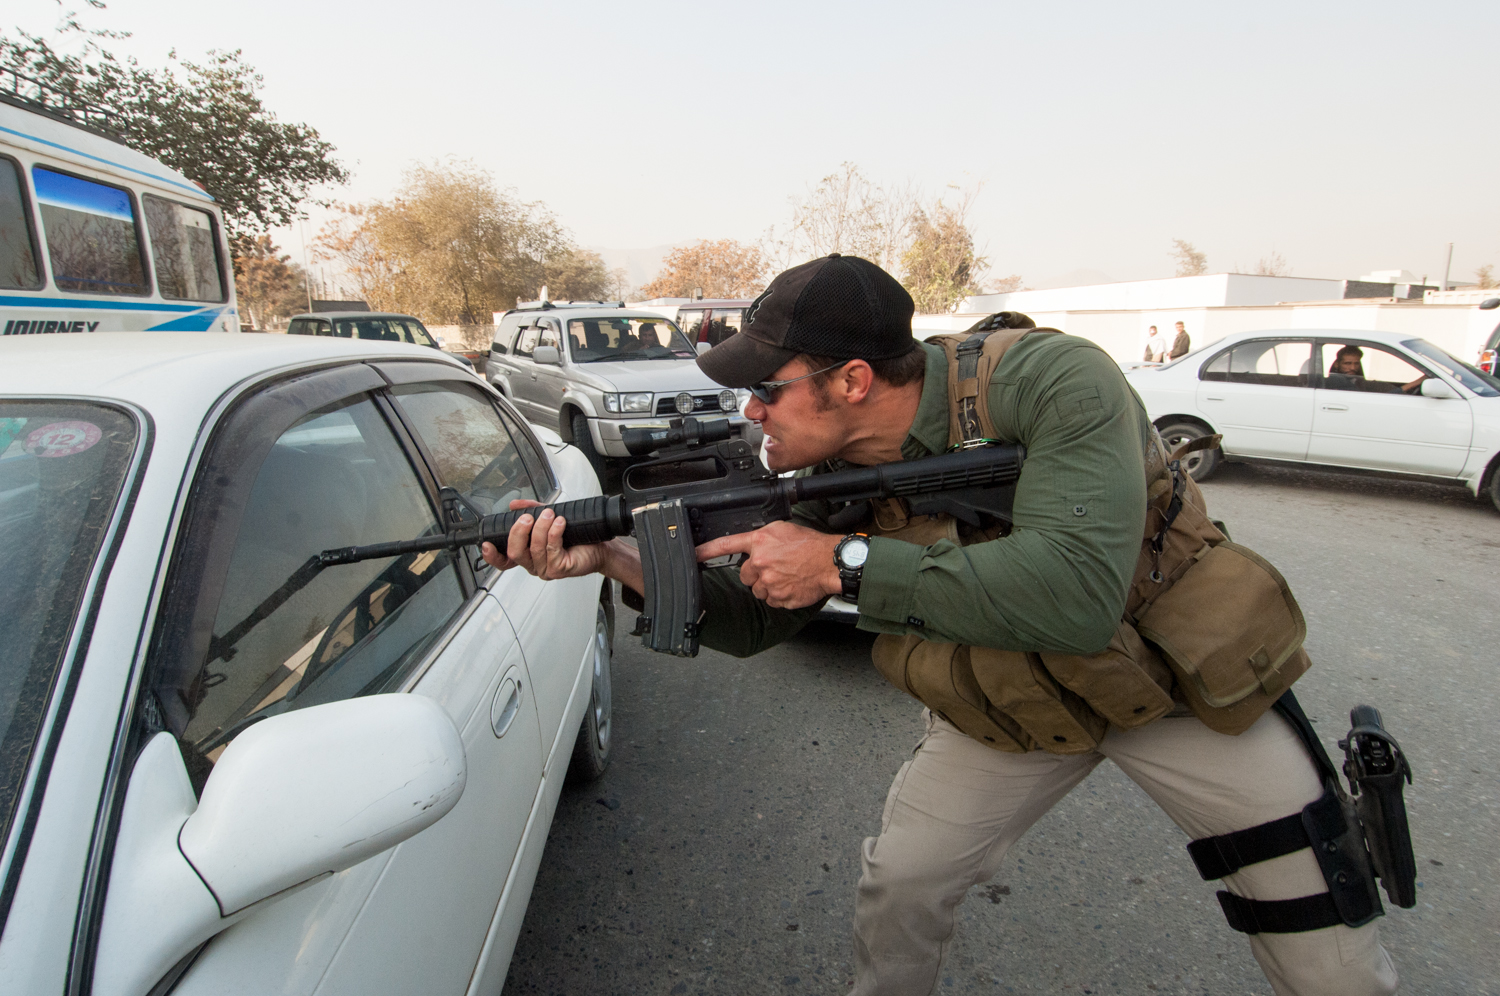  Private security contractor, Neil Gary, a former U.S. Marine, orders a driver at gunpoint to move his car while working to provide security for a convoy in Kabul, Afghanistan. 